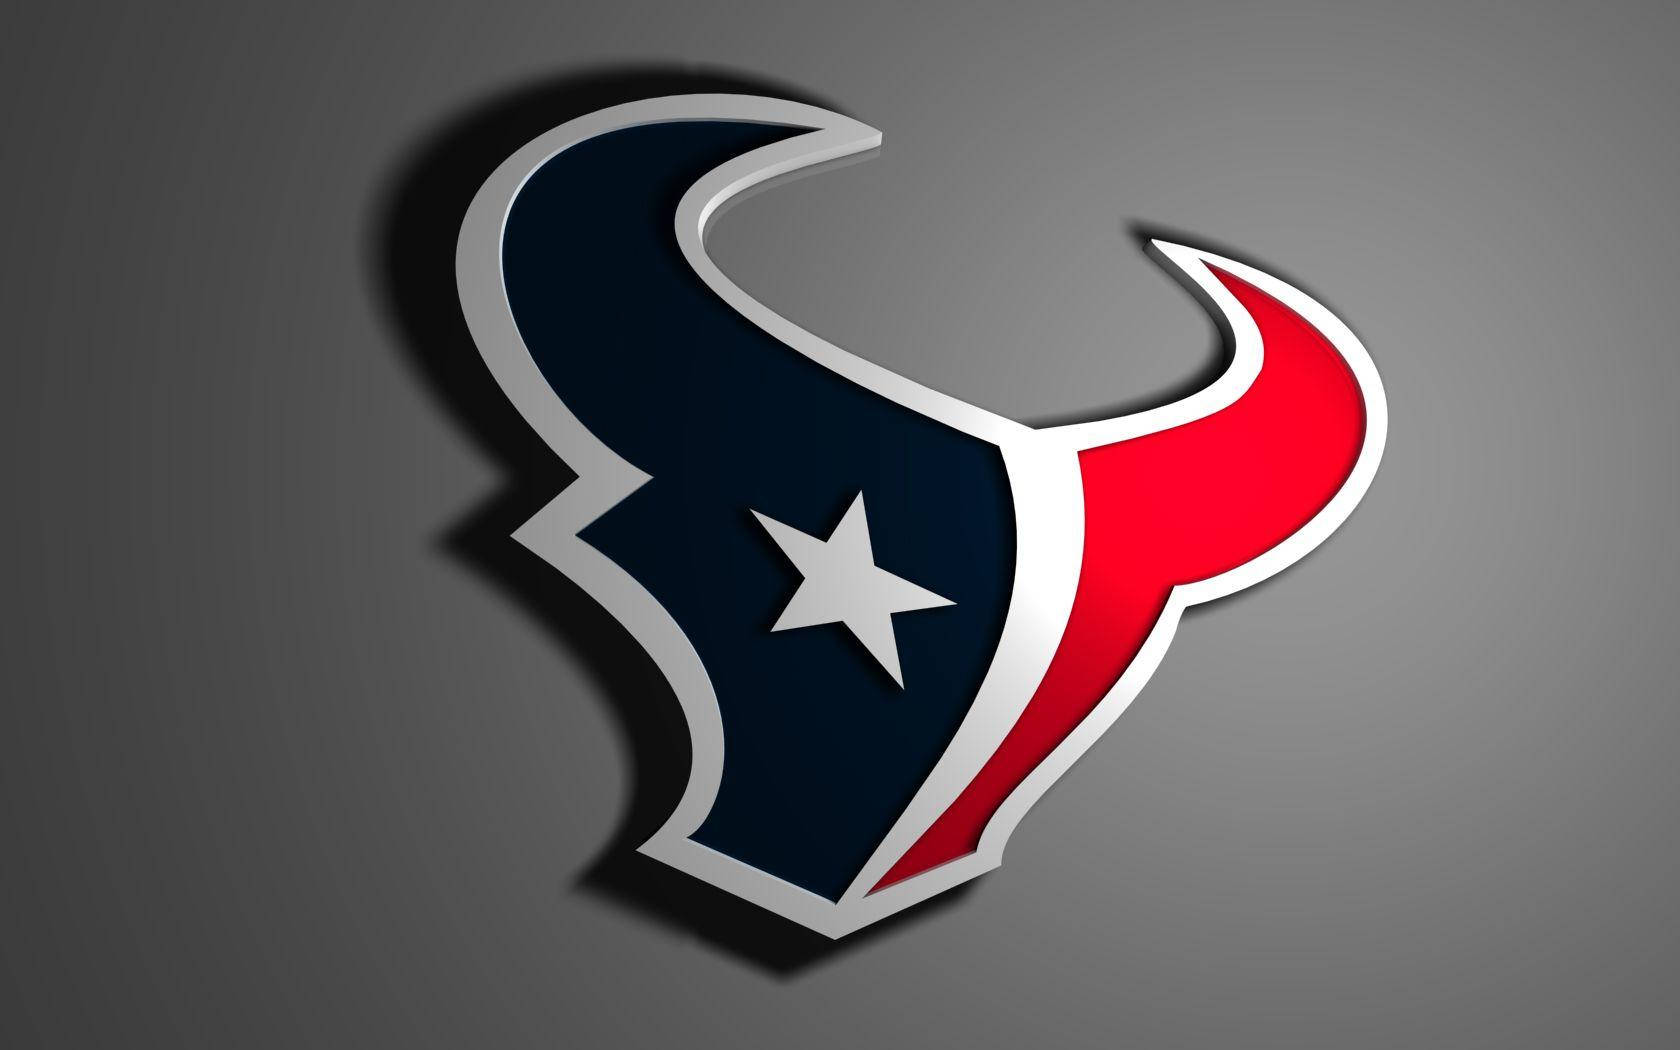 The Houston Texans Ready For The Win Wallpaper